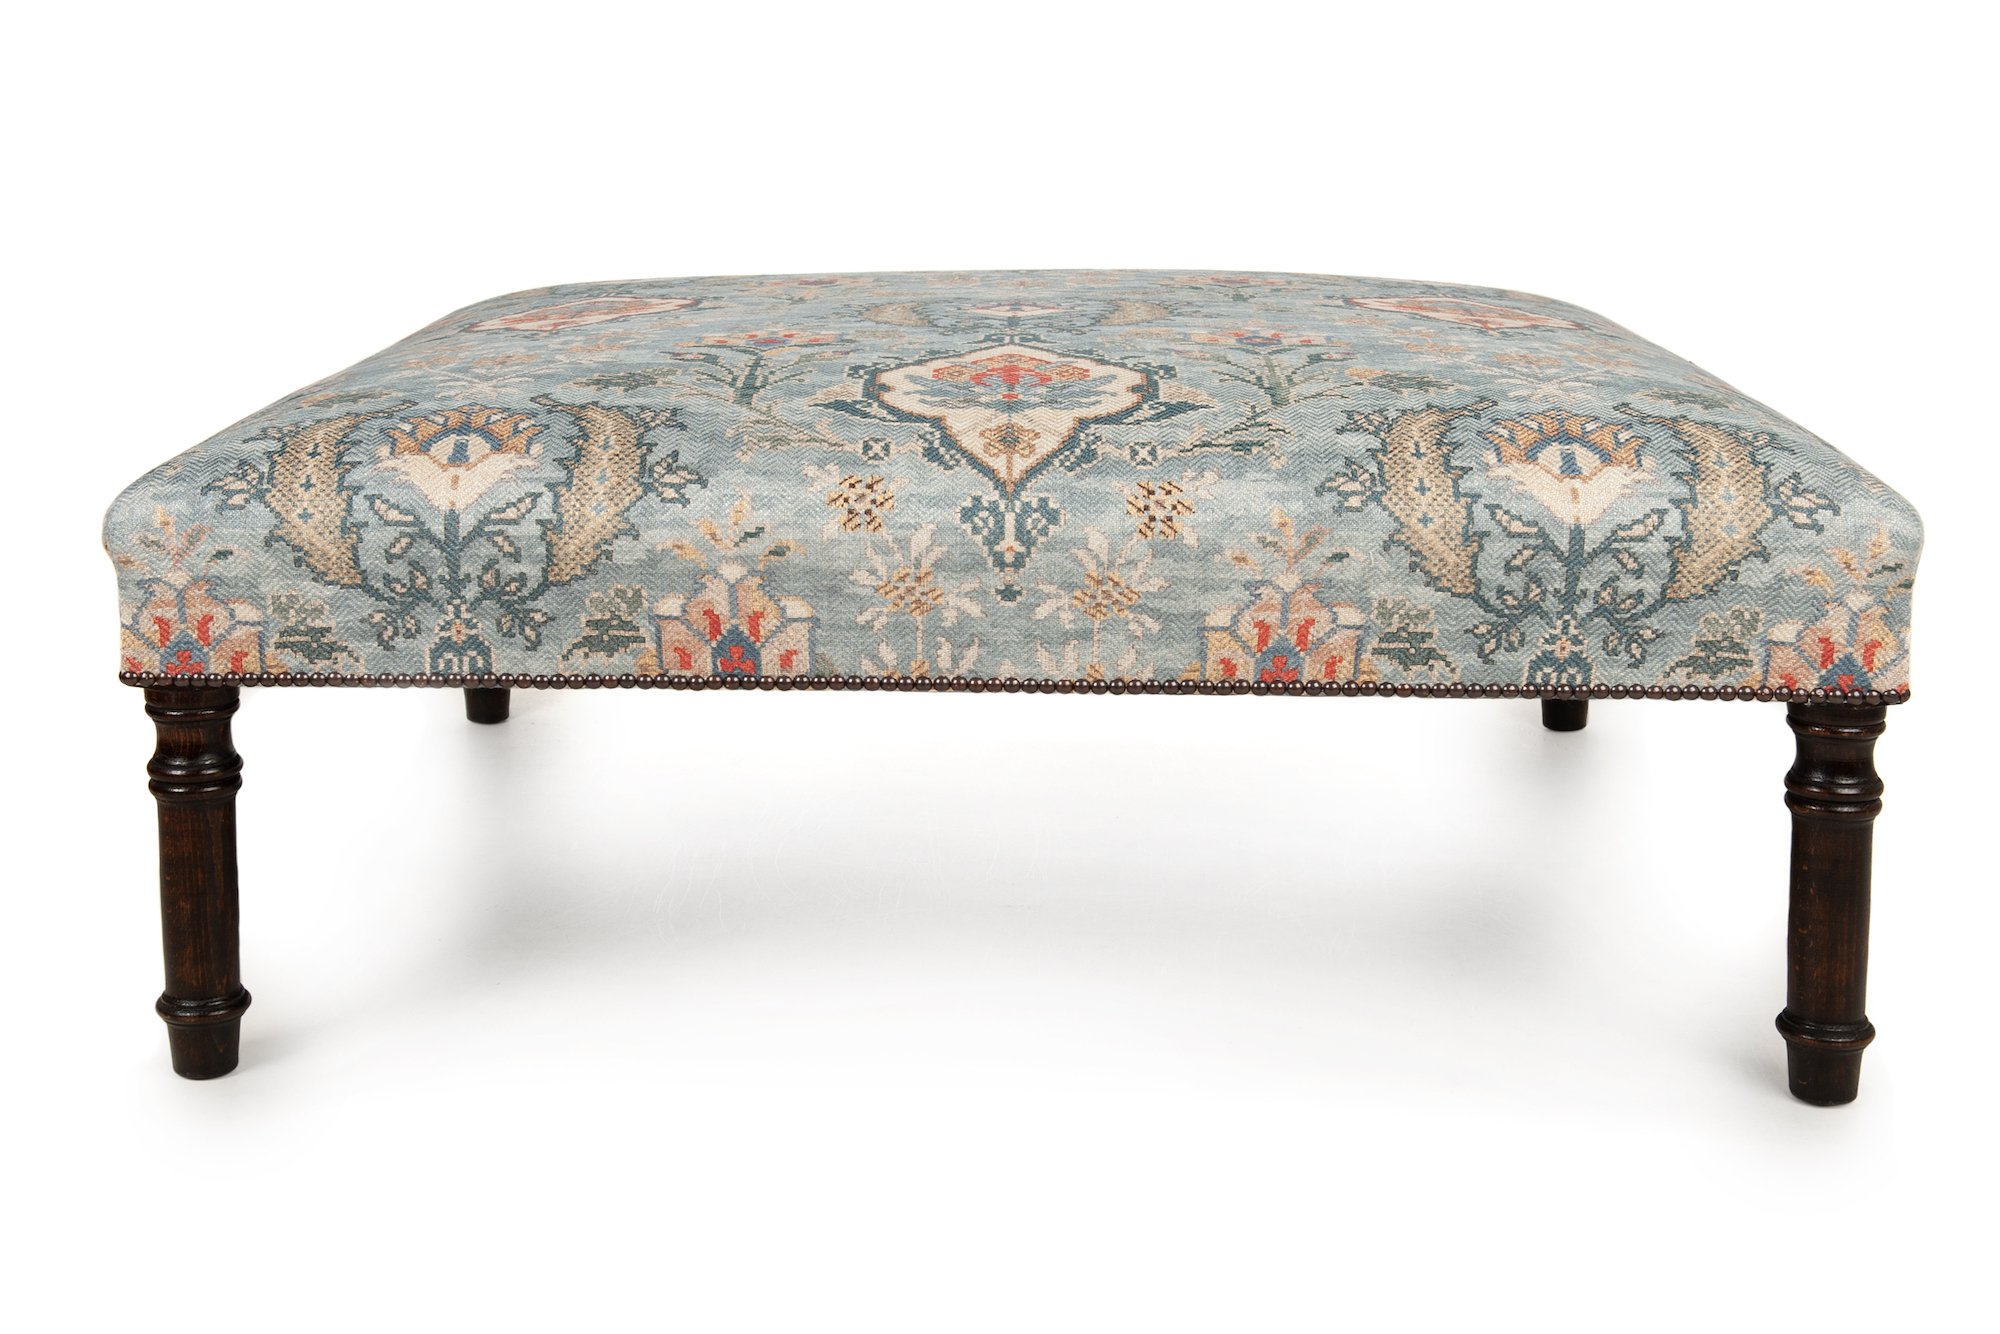 Narrow Border Table Stool with Antique Stud Detailing